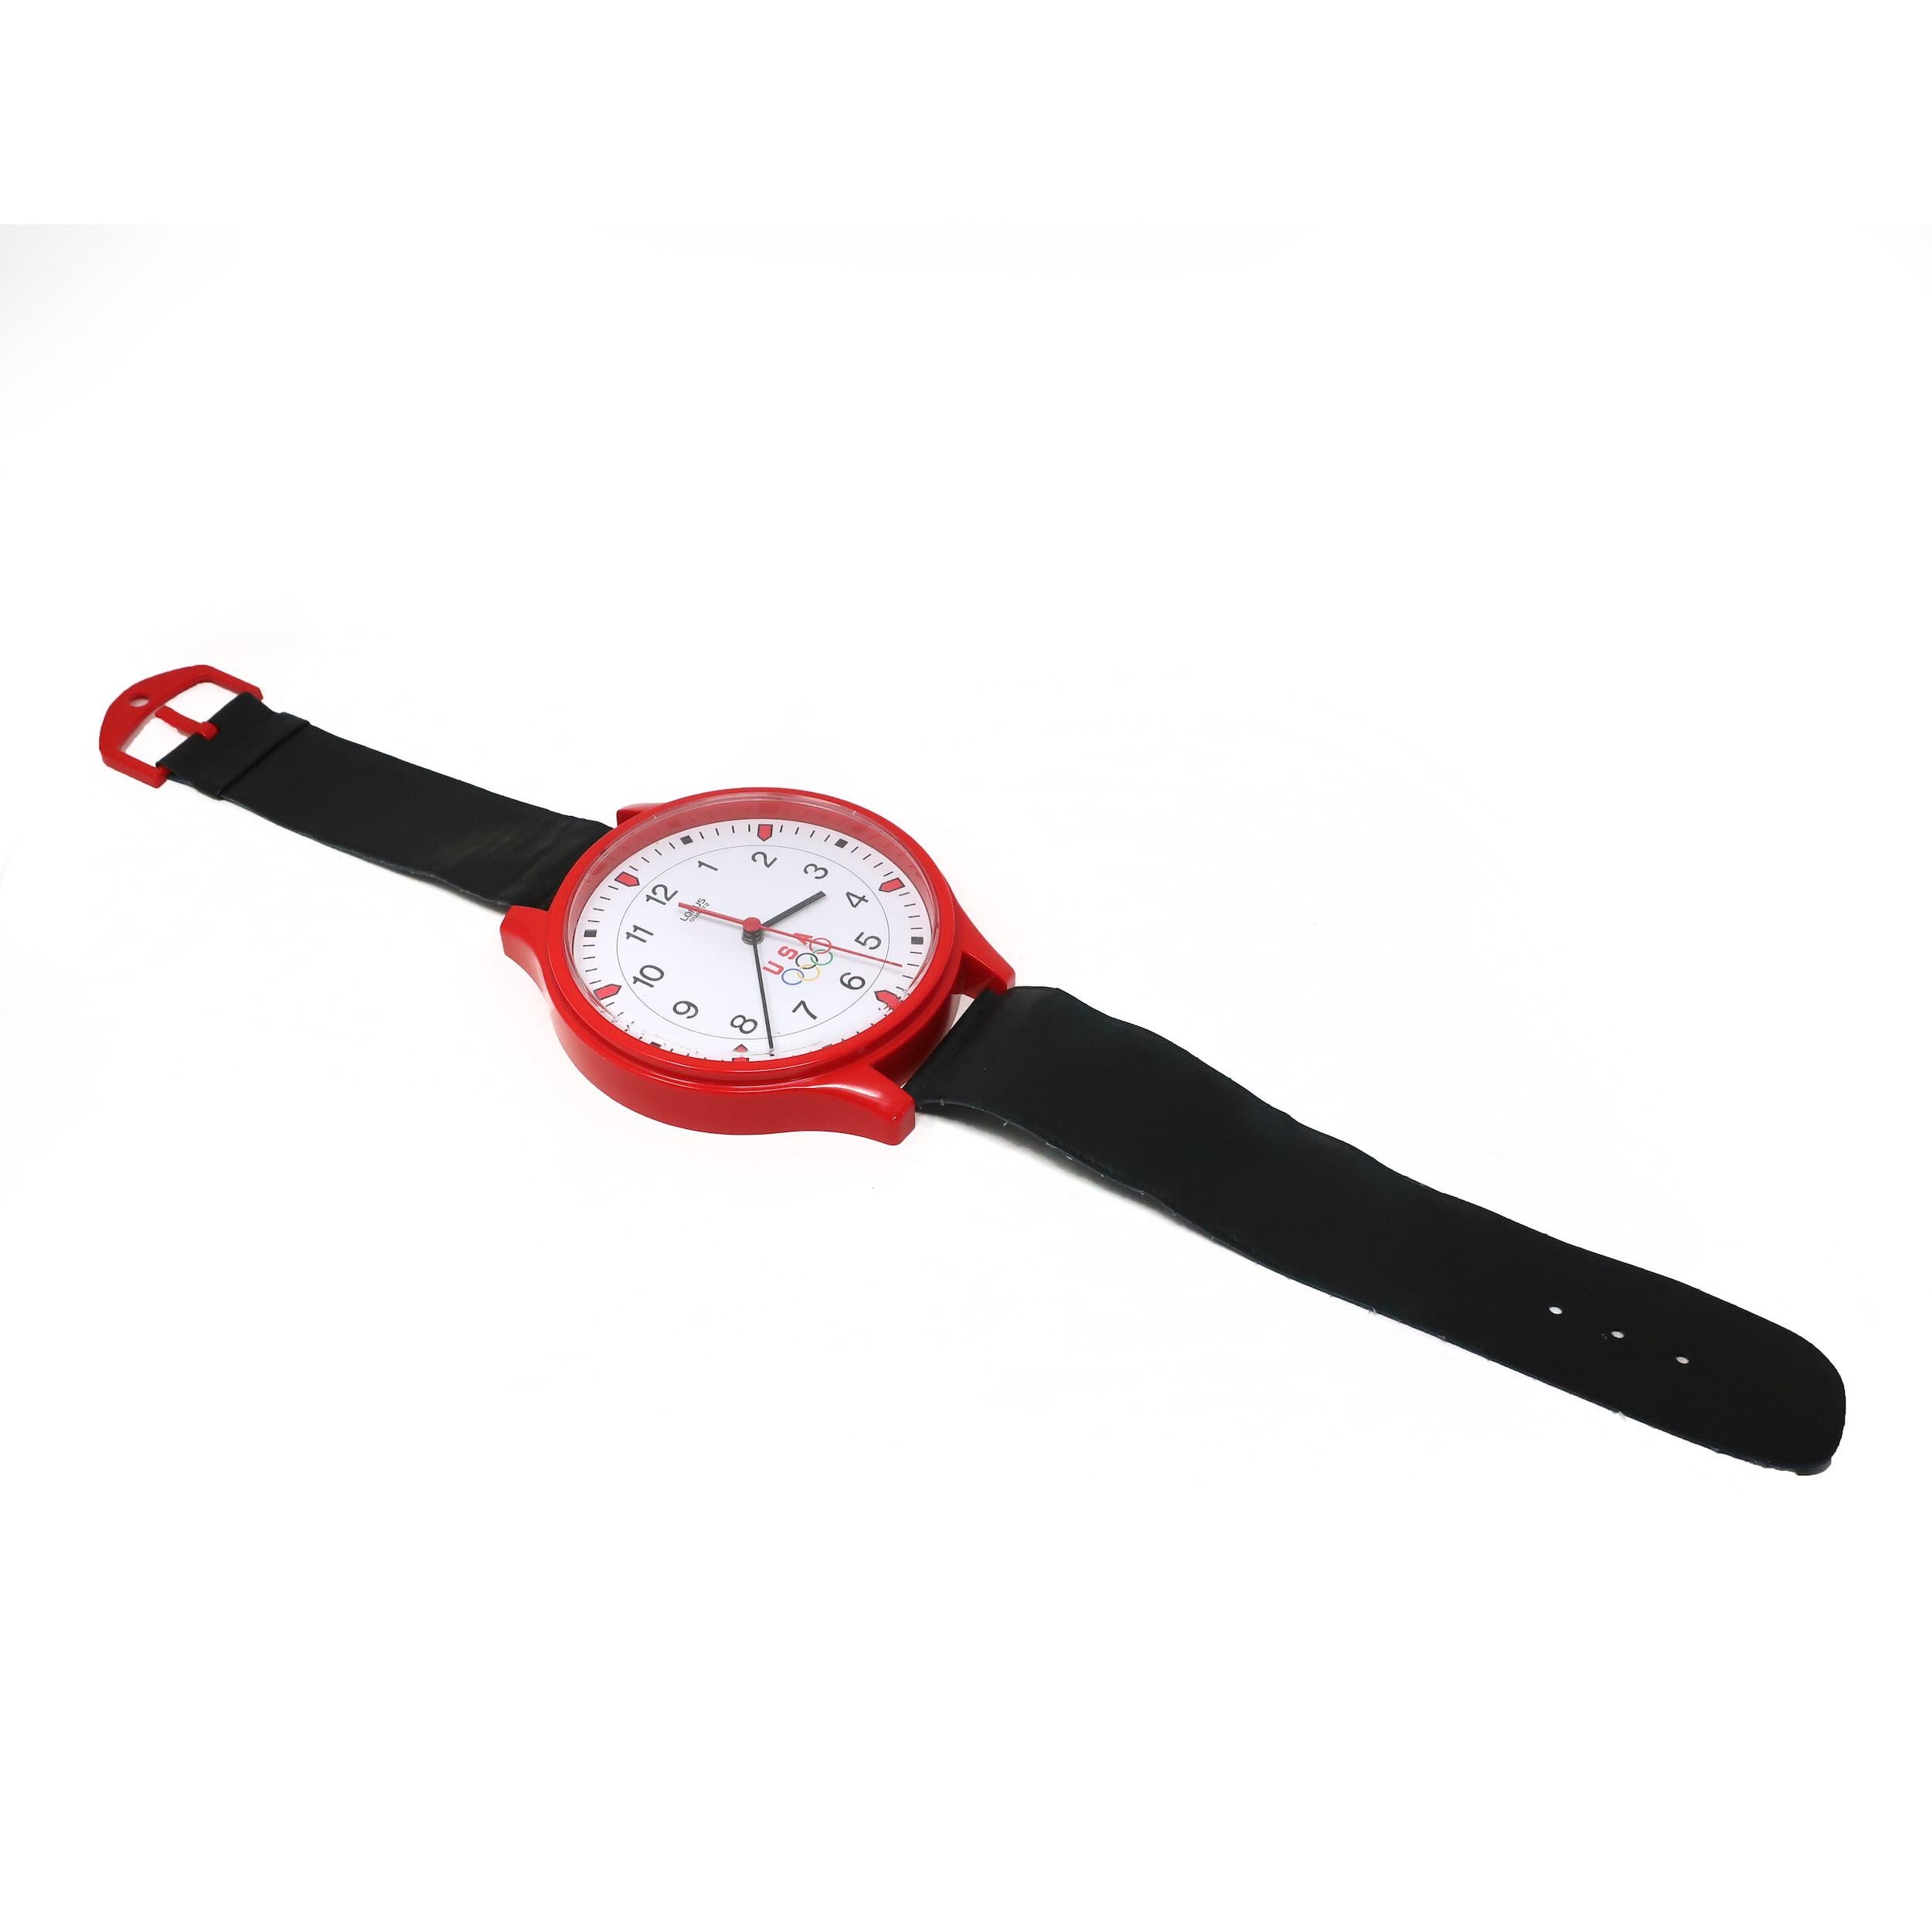 A 1980s USA Olympics clock in the shape of a wristwatch manufactured by Lorus. Likely released to commemorate the 1984 Los Angeles Olympics, this wall clock has a white face, black and red hands, black numbers, a red case, black straps, and a red